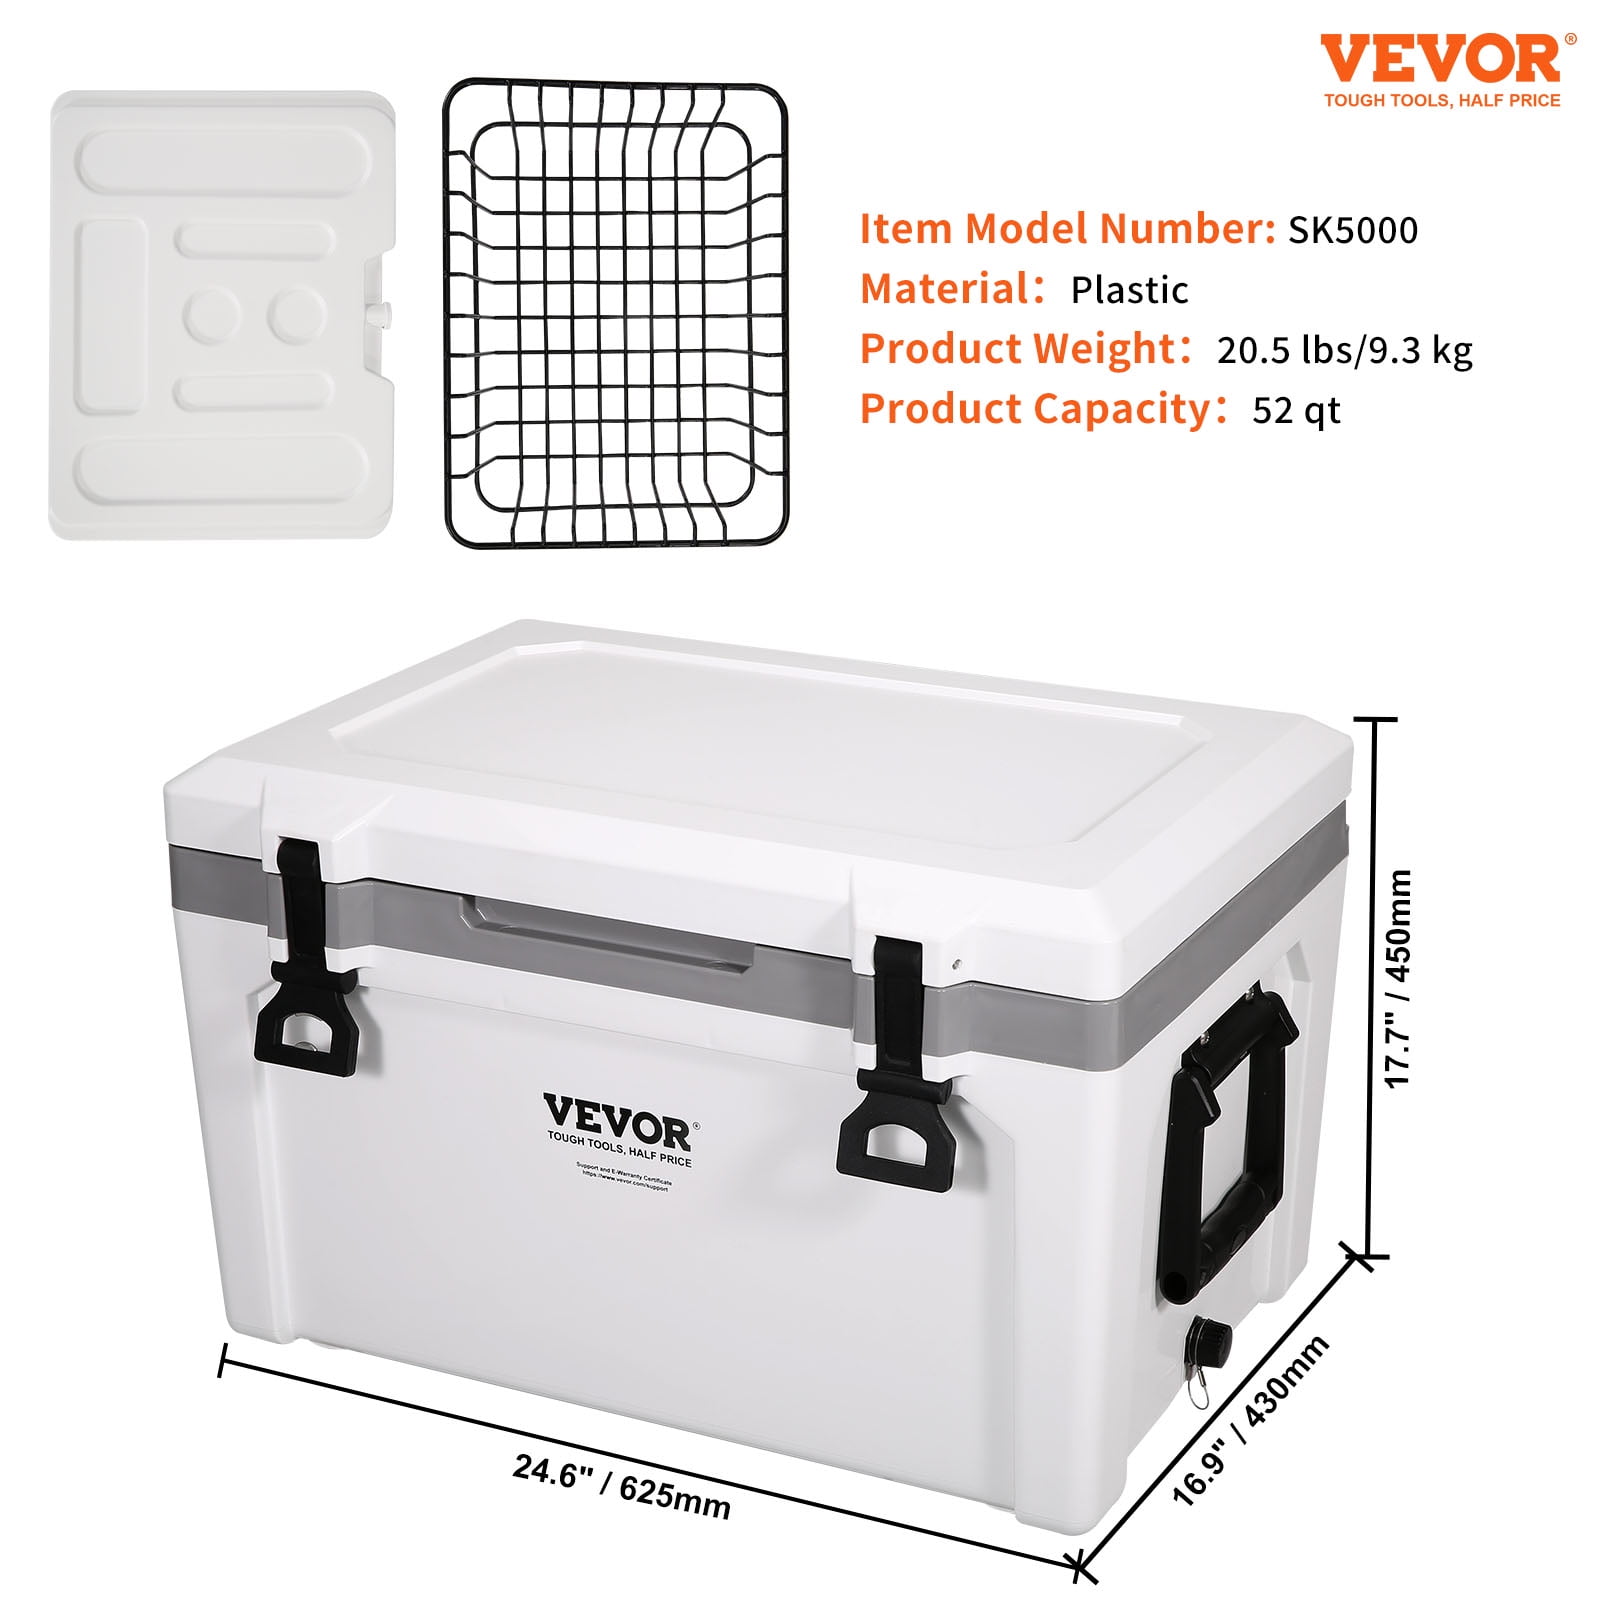 VEVOR Insulated Portable Cooler 45 qt. Holds 45 Cans, Ice Retention Hard Cooler with Heavy-Duty Handle, Ice Chest Lunch Box, White